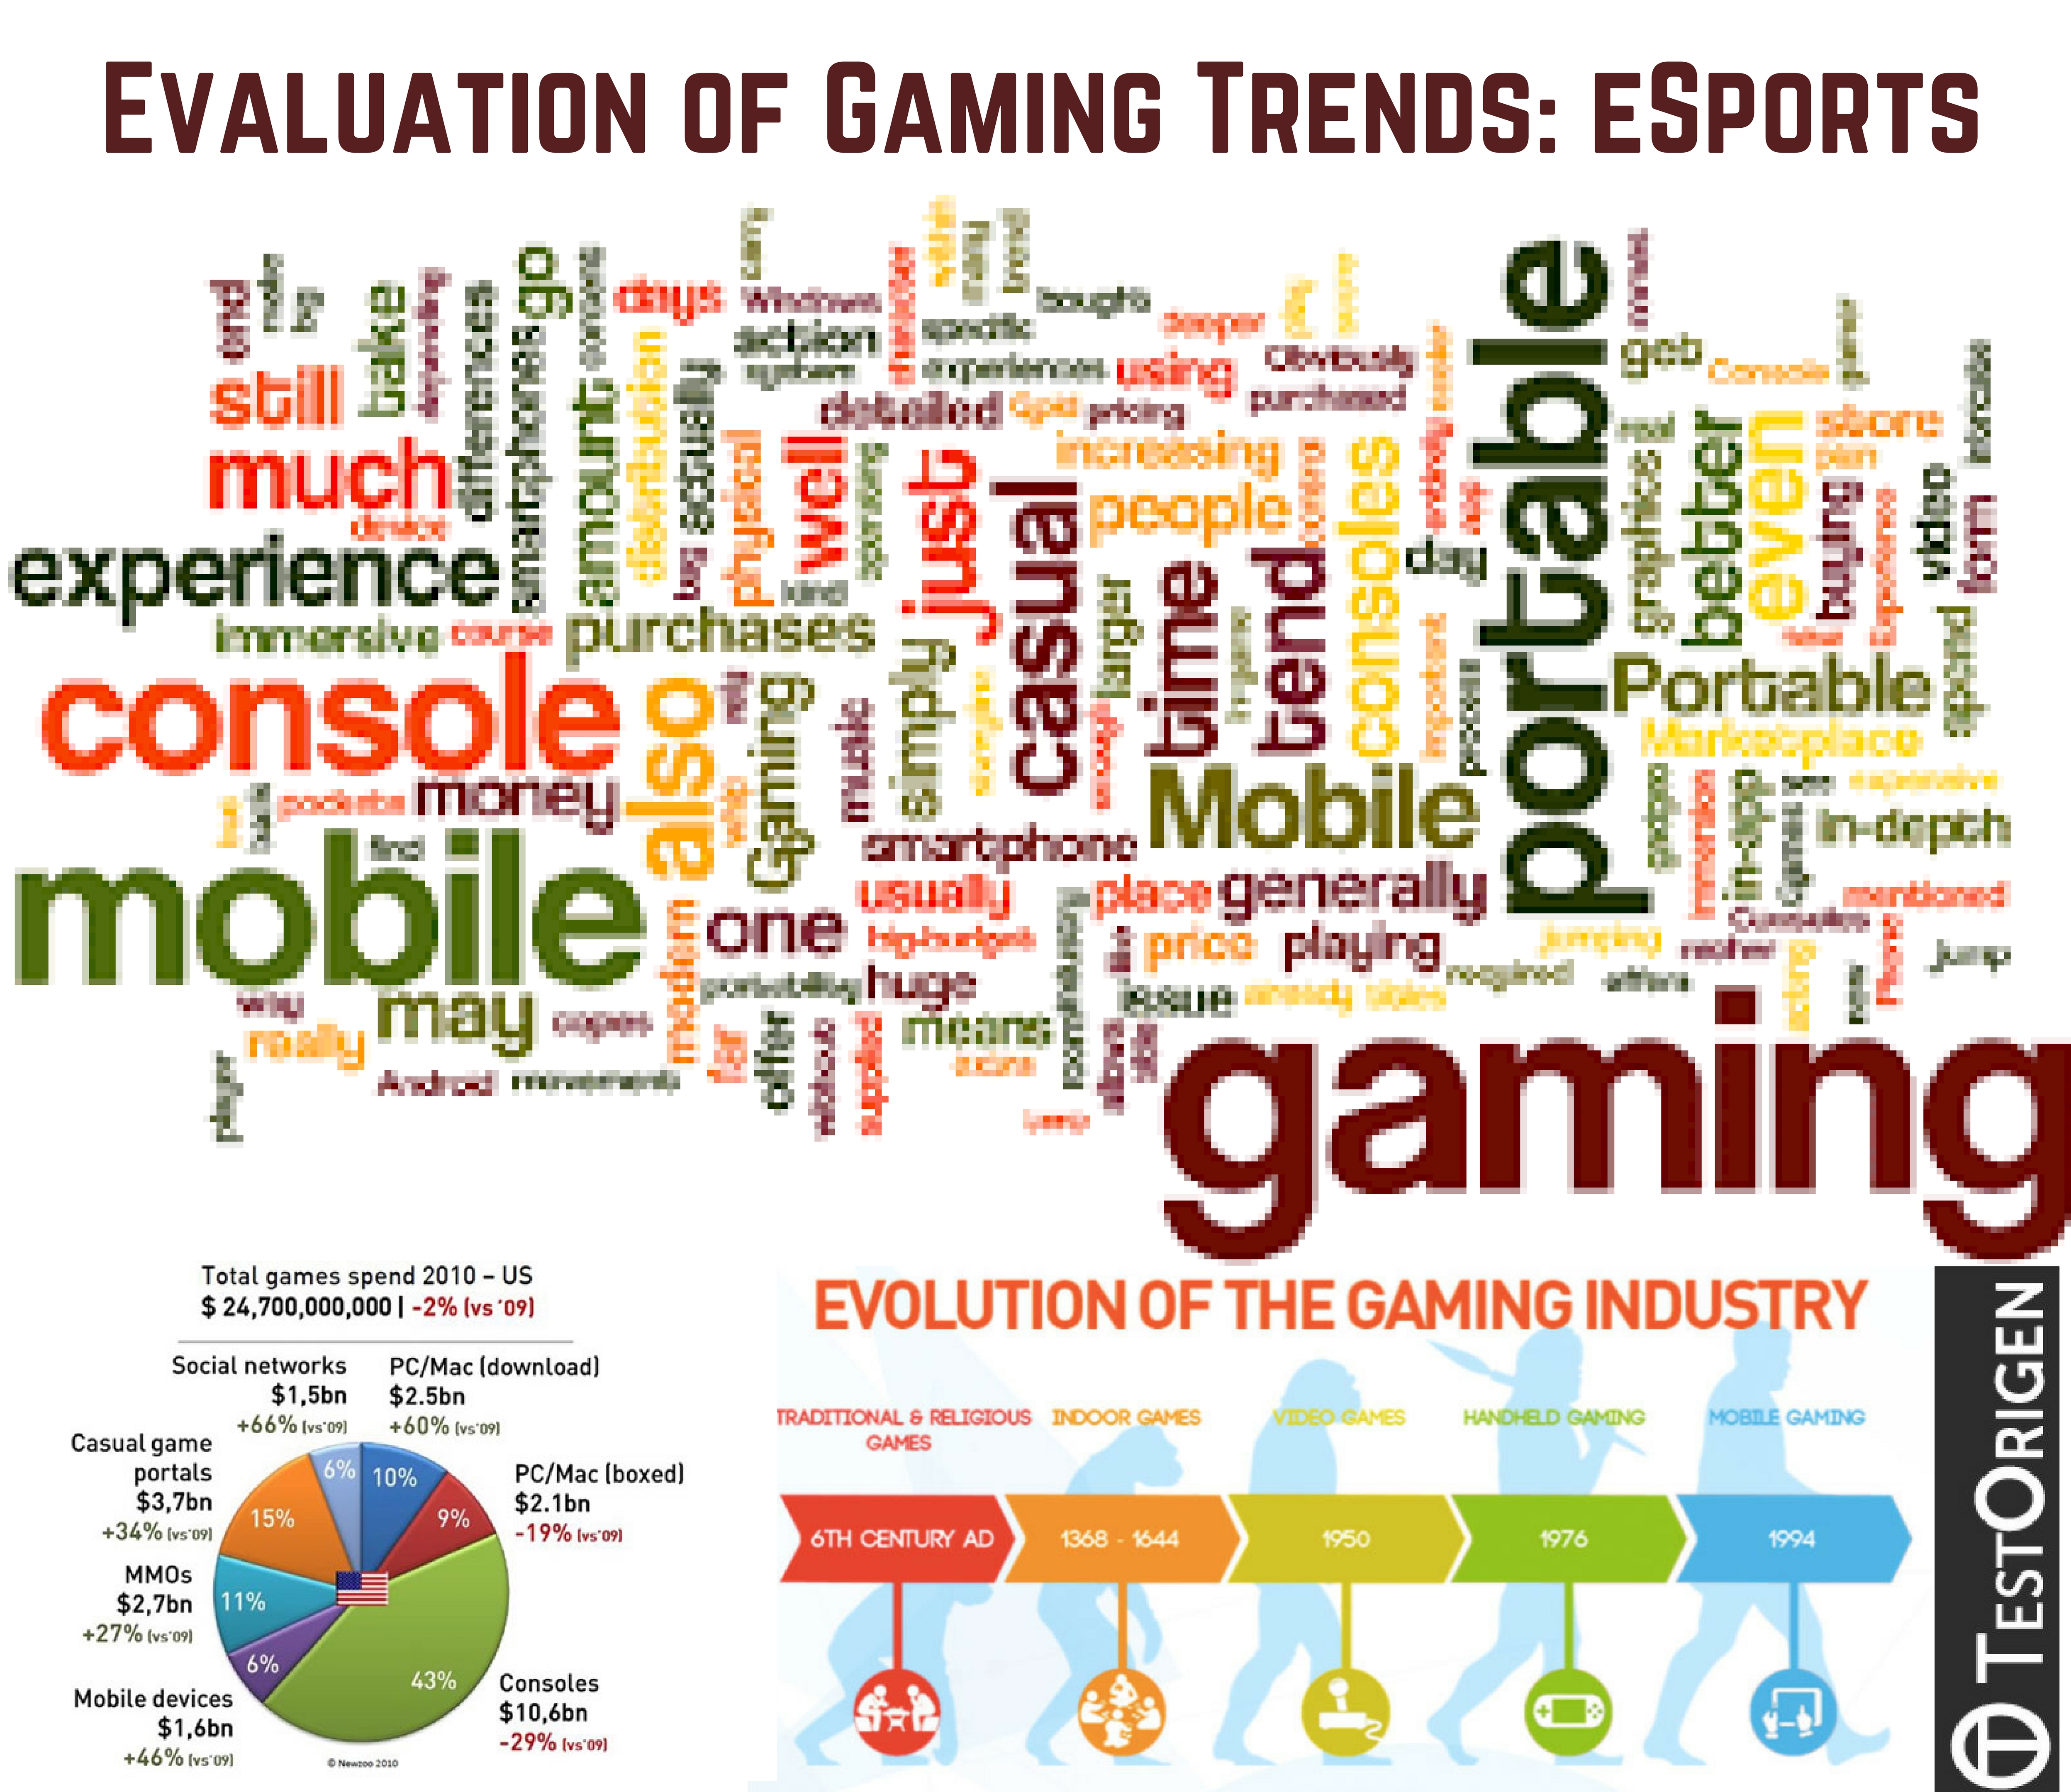 Evaluation of Gaming Trends: eSports